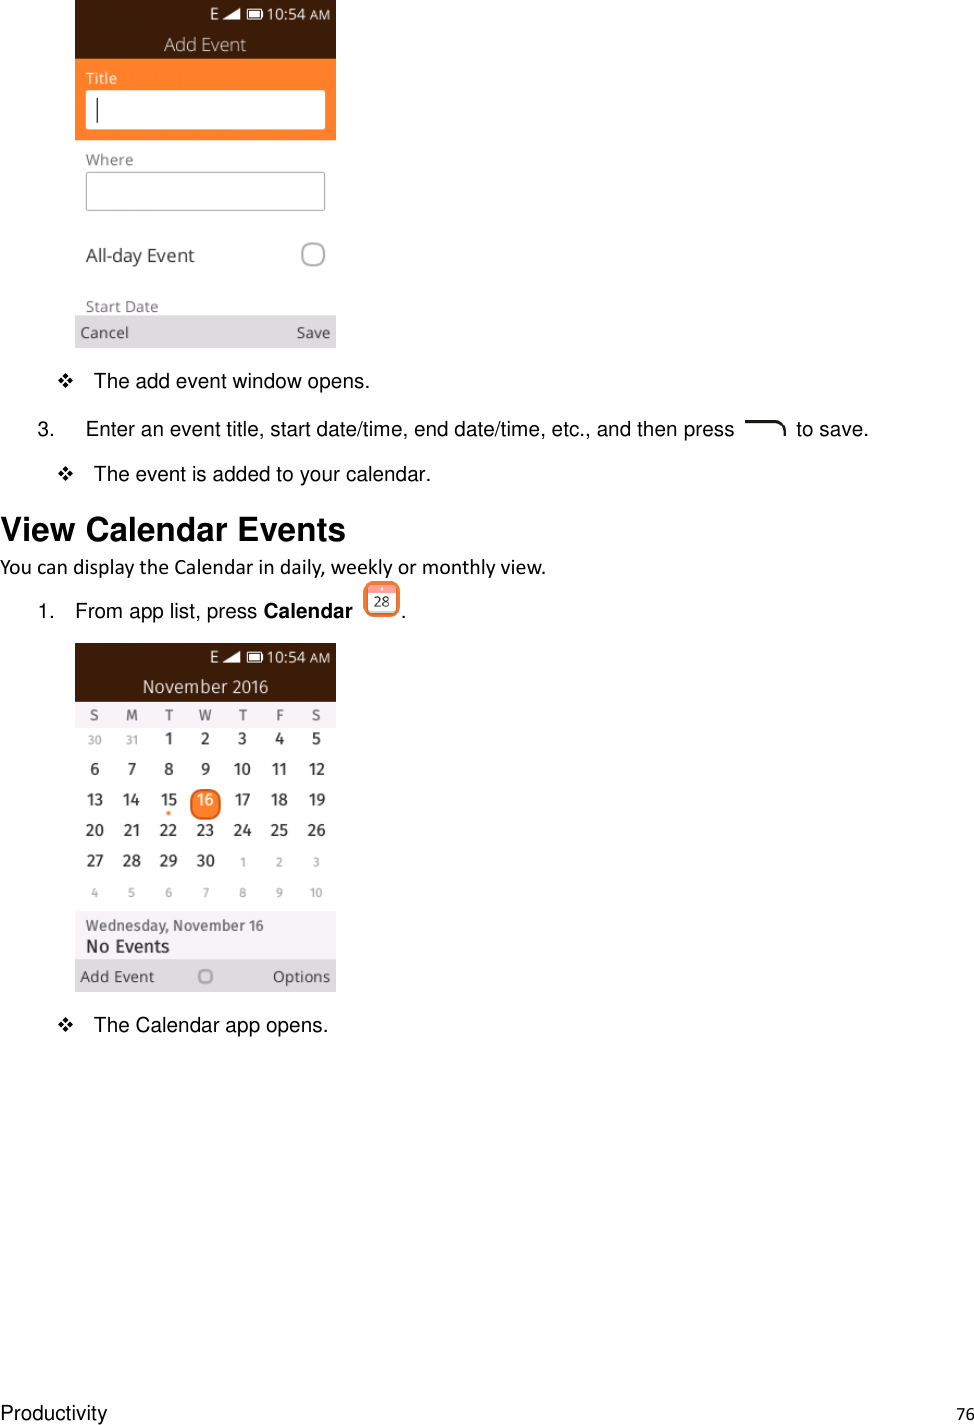 Productivity    76    The add event window opens. 3.    Enter an event title, start date/time, end date/time, etc., and then press    to save.   The event is added to your calendar. View Calendar Events You can display the Calendar in daily, weekly or monthly view. 1.  From app list, press Calendar  .    The Calendar app opens. 